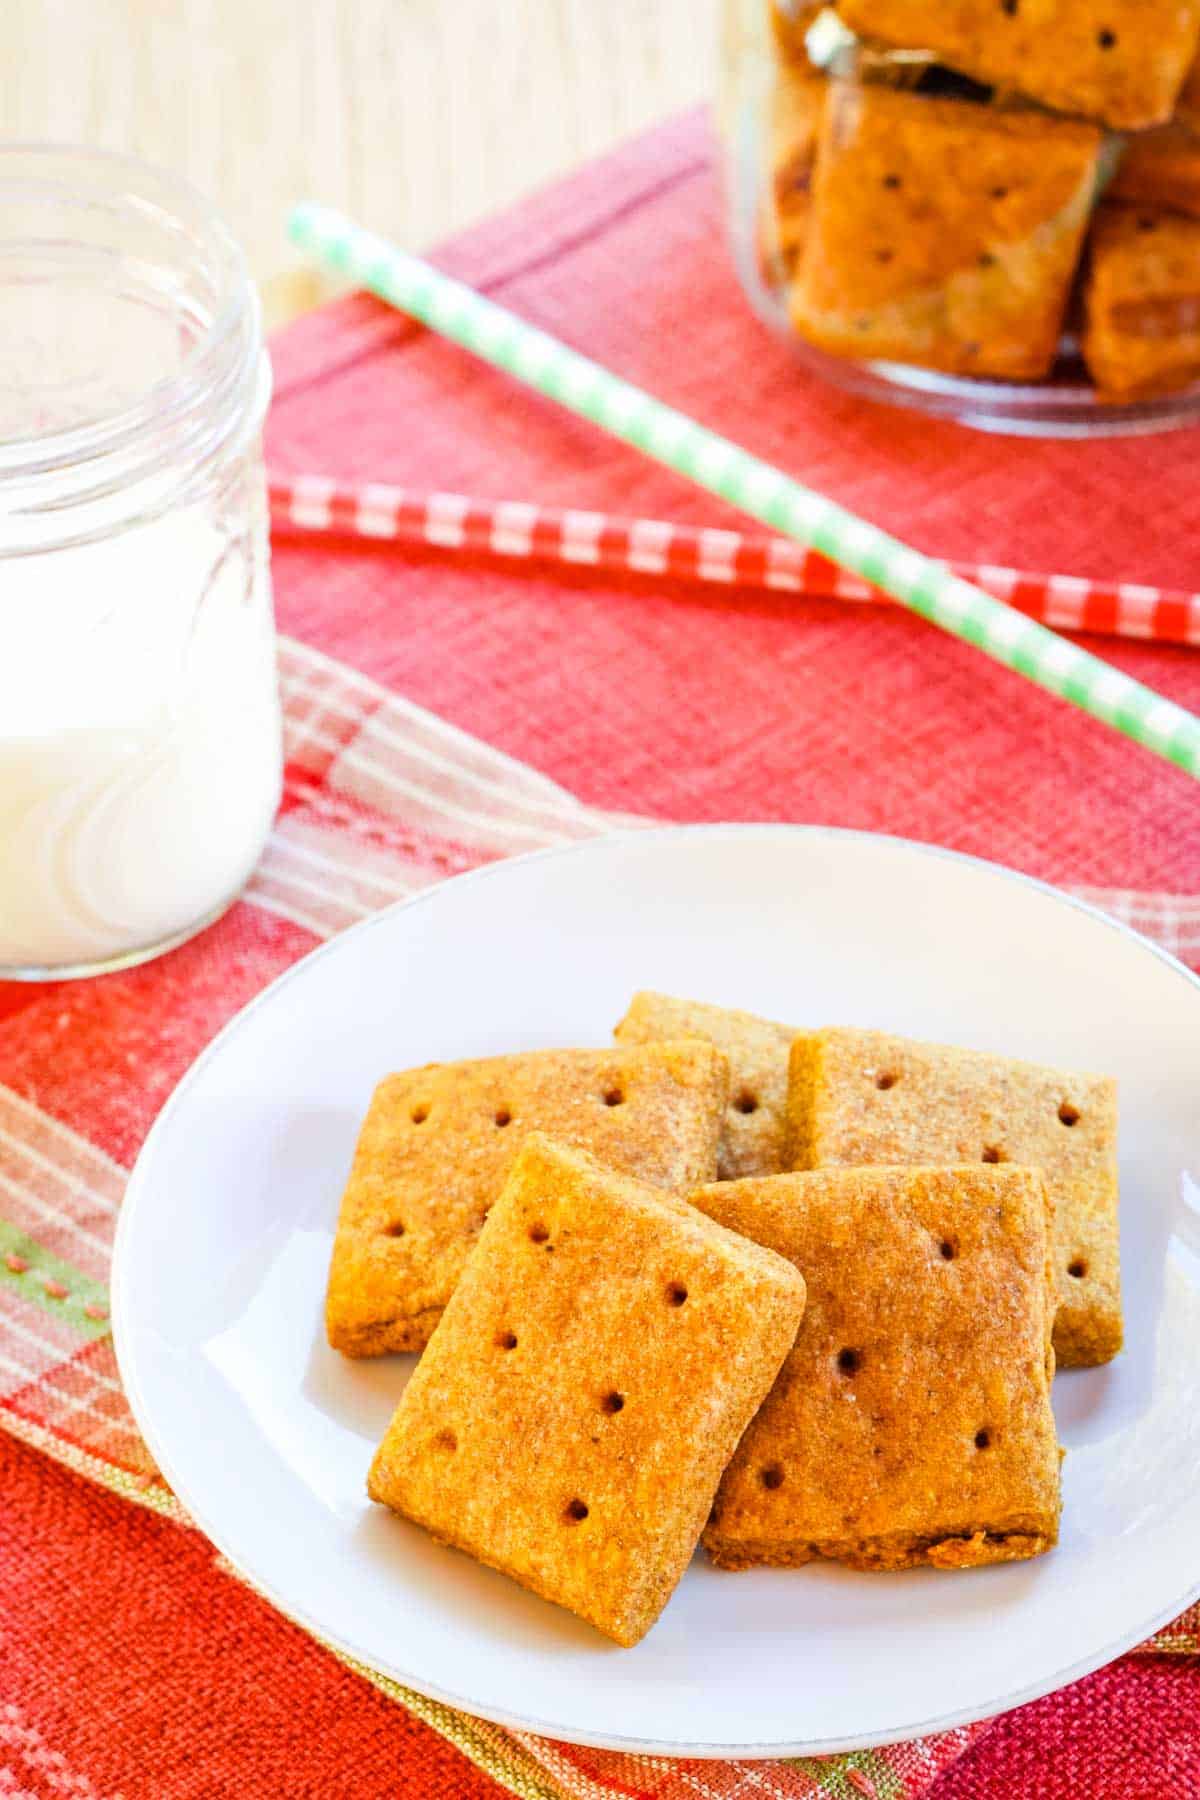 Soft and chewy Graham crackers are served on a plate with a glass of milk